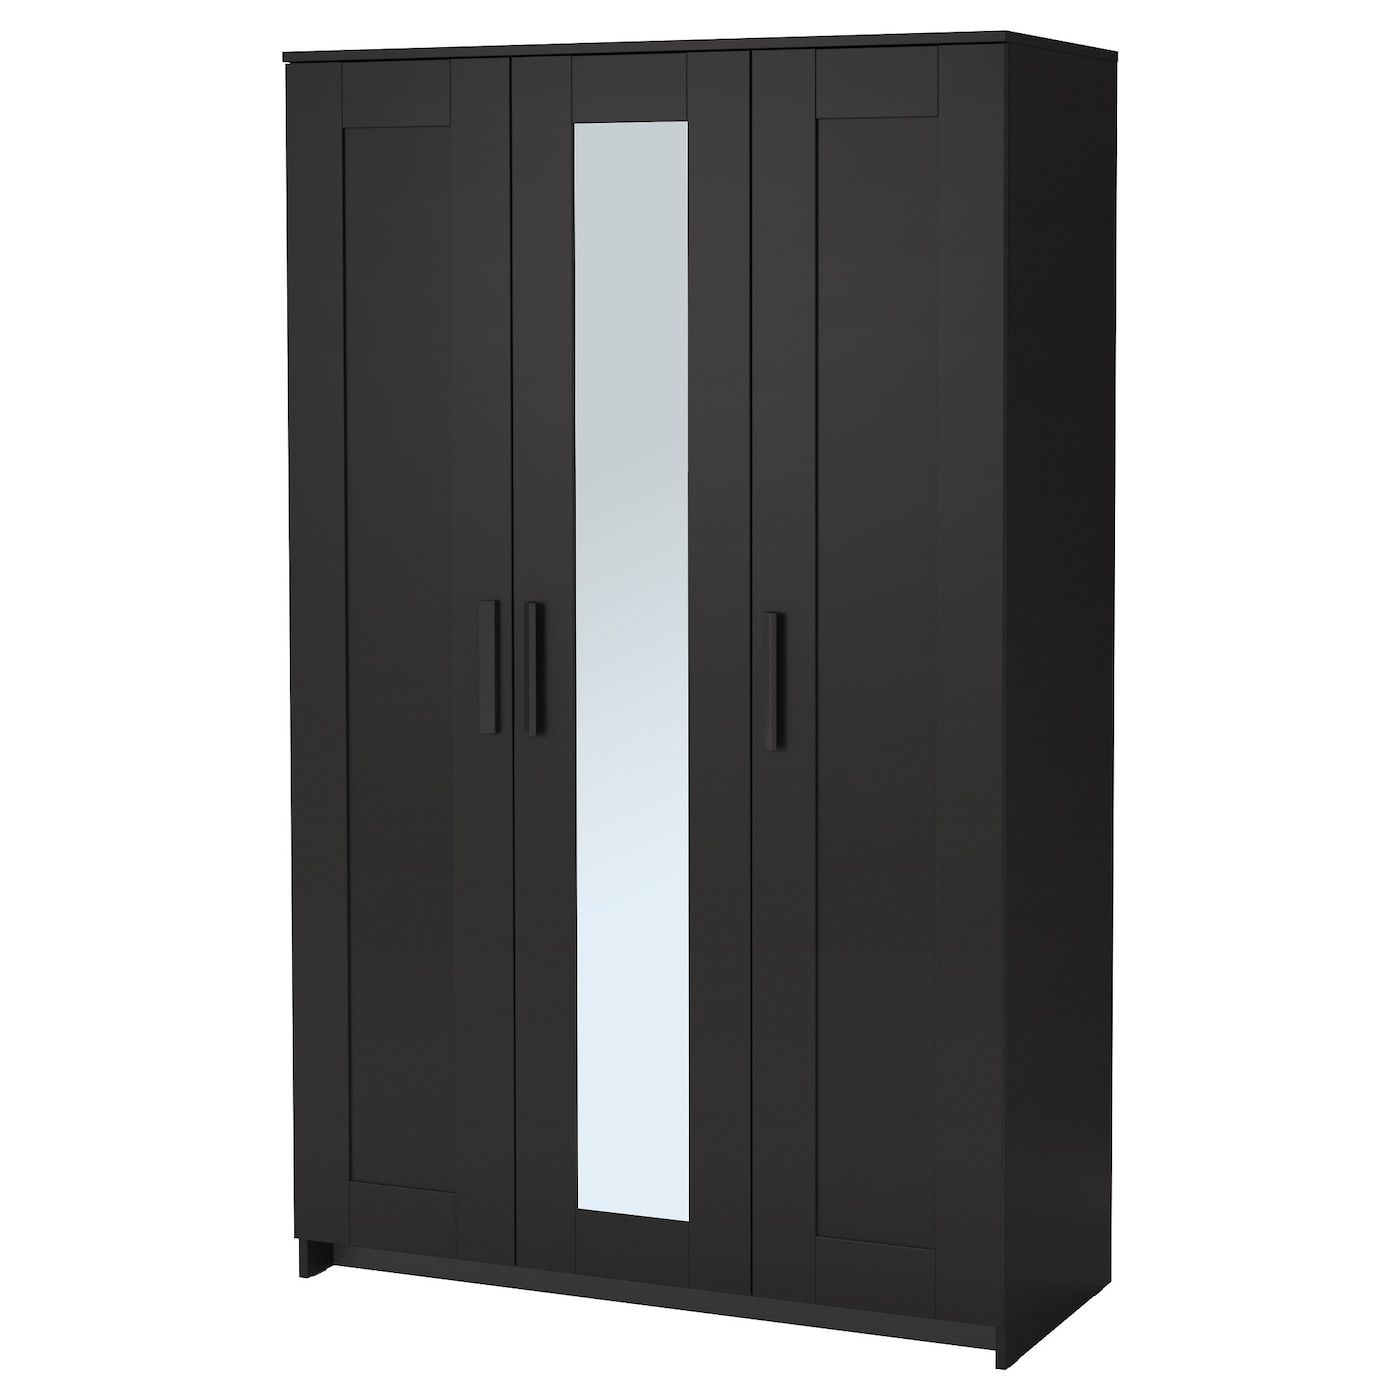 Brimnes Wardrobe With 3 Doors, Black, 46x743/4" – Ikea With Regard To Cheap Black Wardrobes (View 9 of 15)